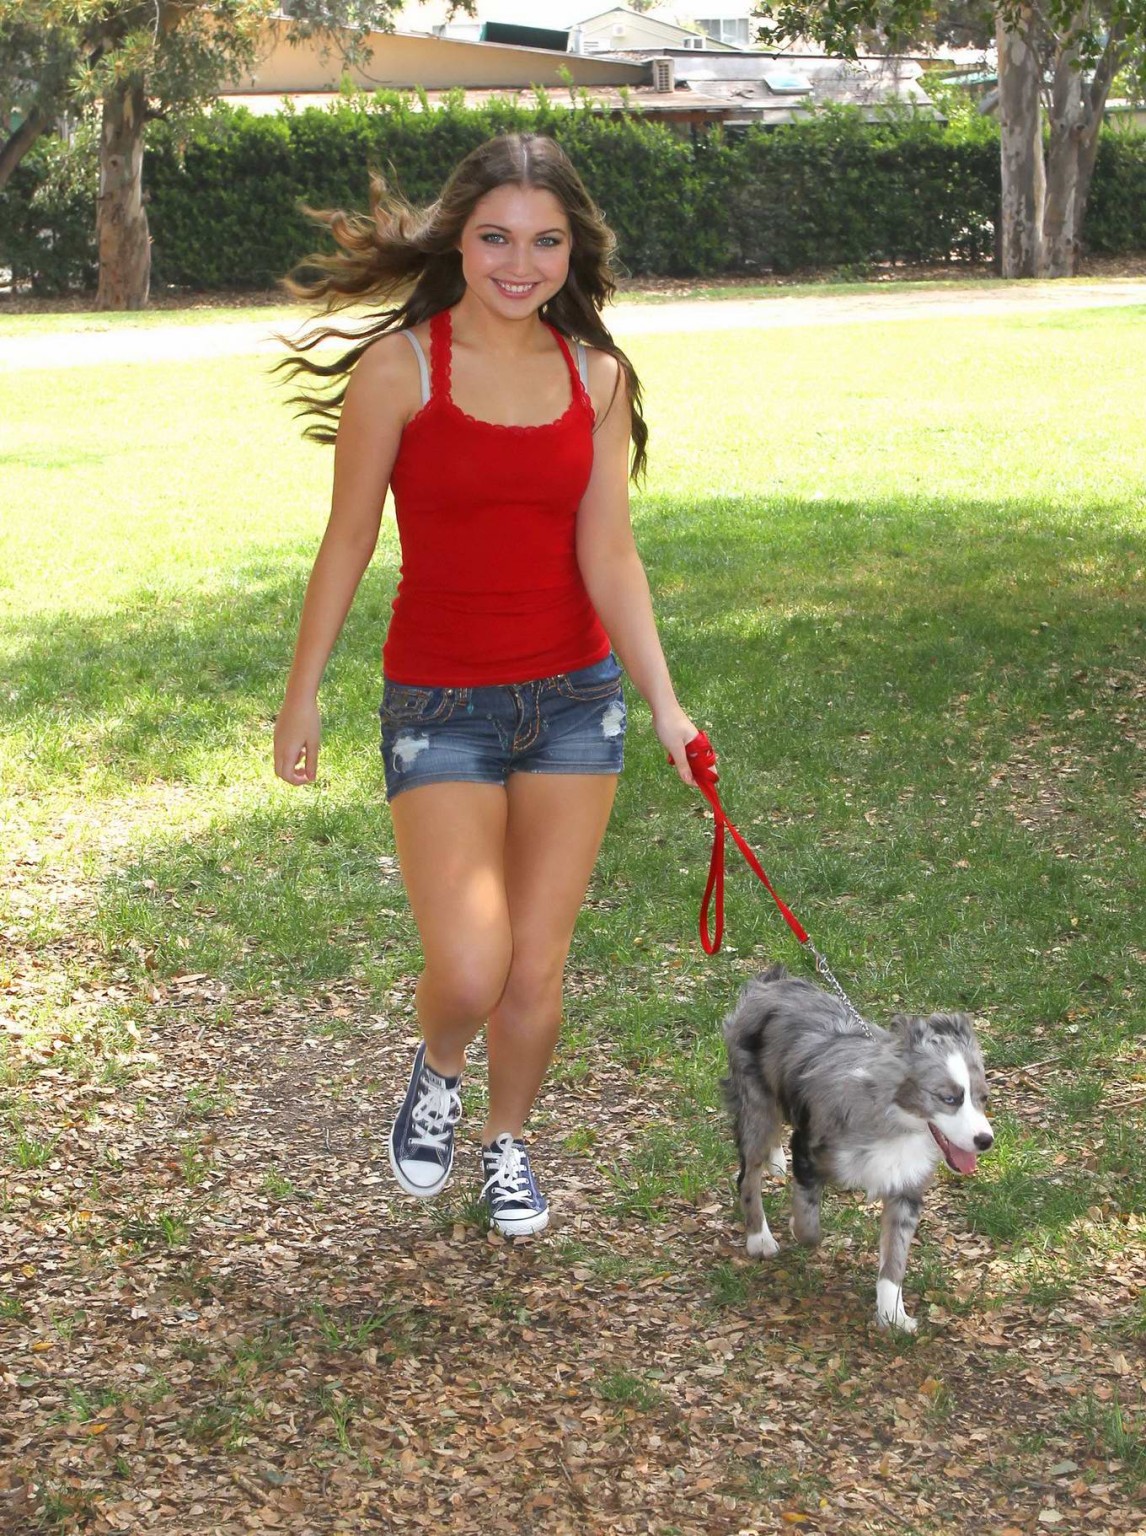 Sammi Hanratty leggy in tiny red top and hotpants at the park in North Hollywood #75197739